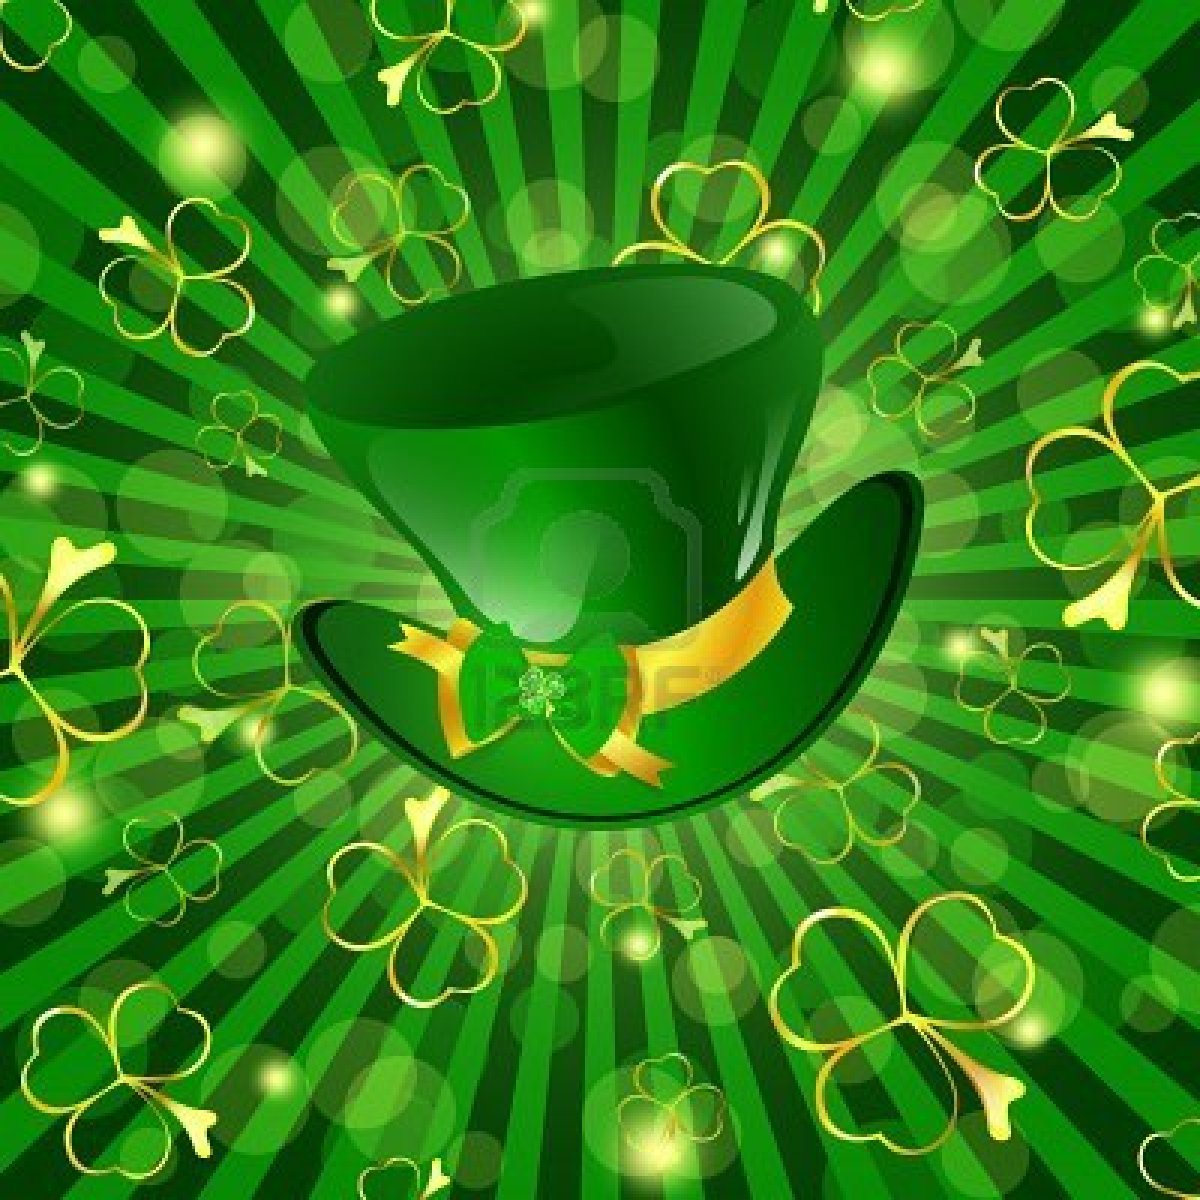 Related Pictures Shamrock Powerpoint Background